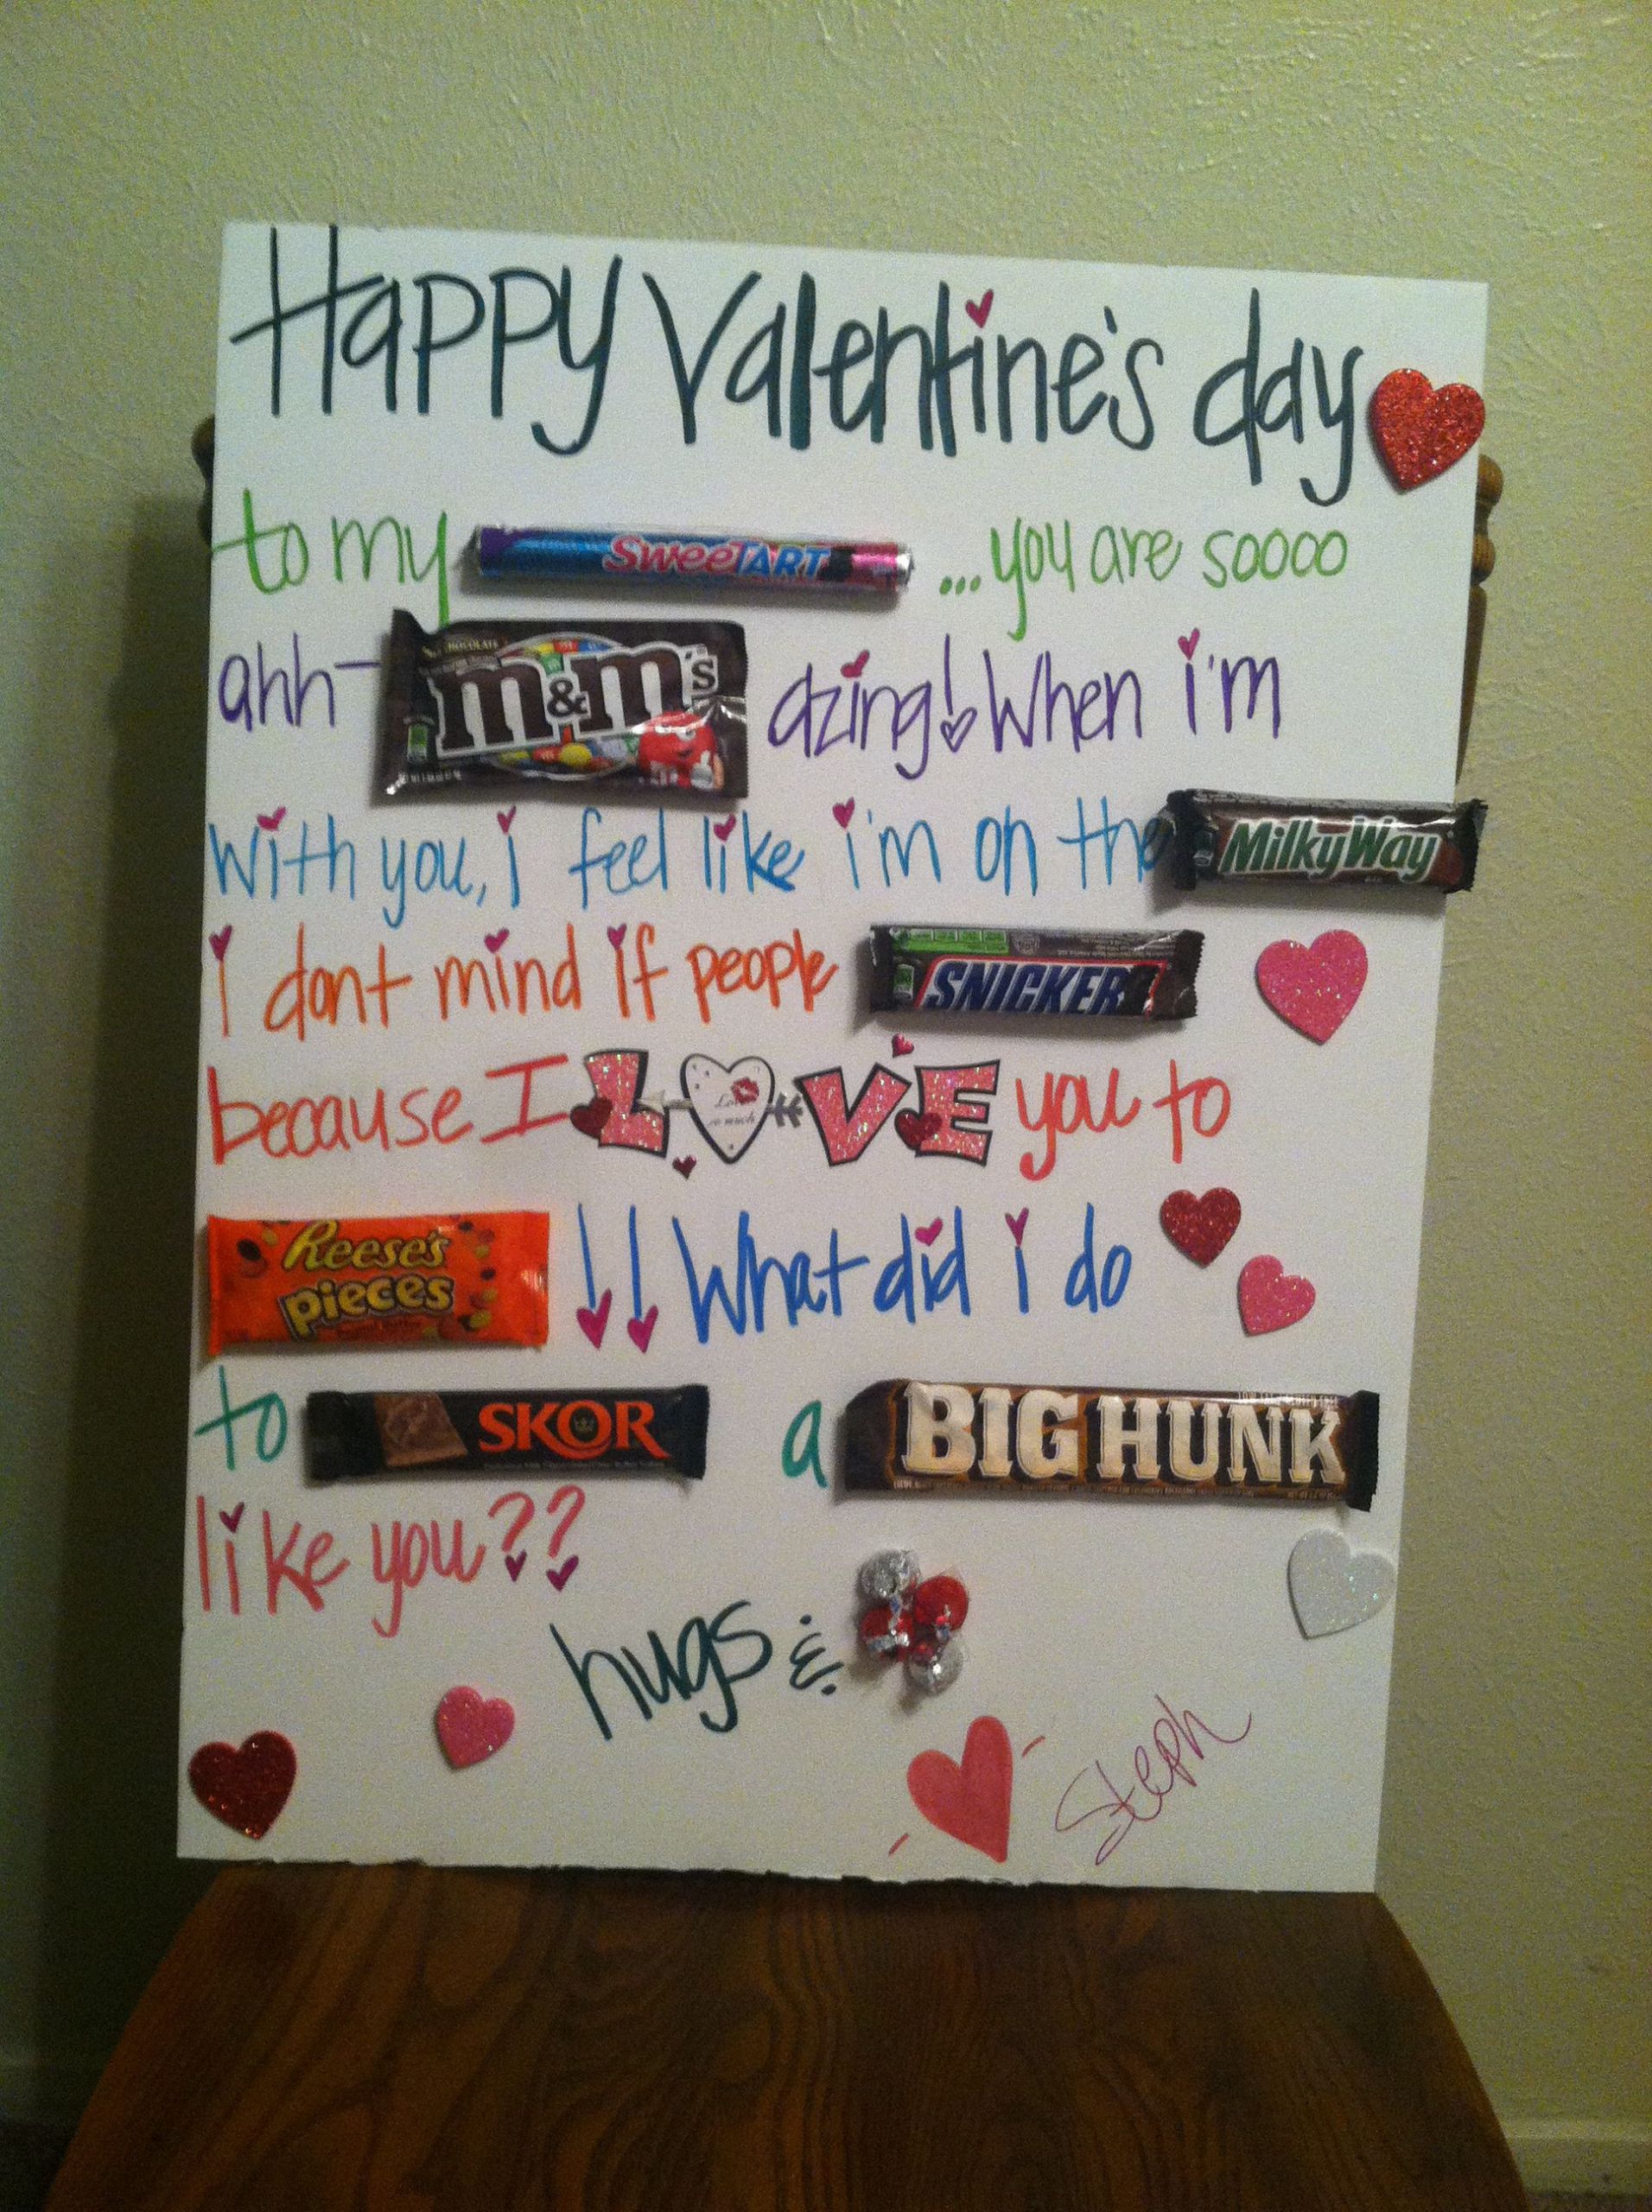 Valentines Day Candy Card
 My Candy Bar Poster for my Hunny for Valentine s Day